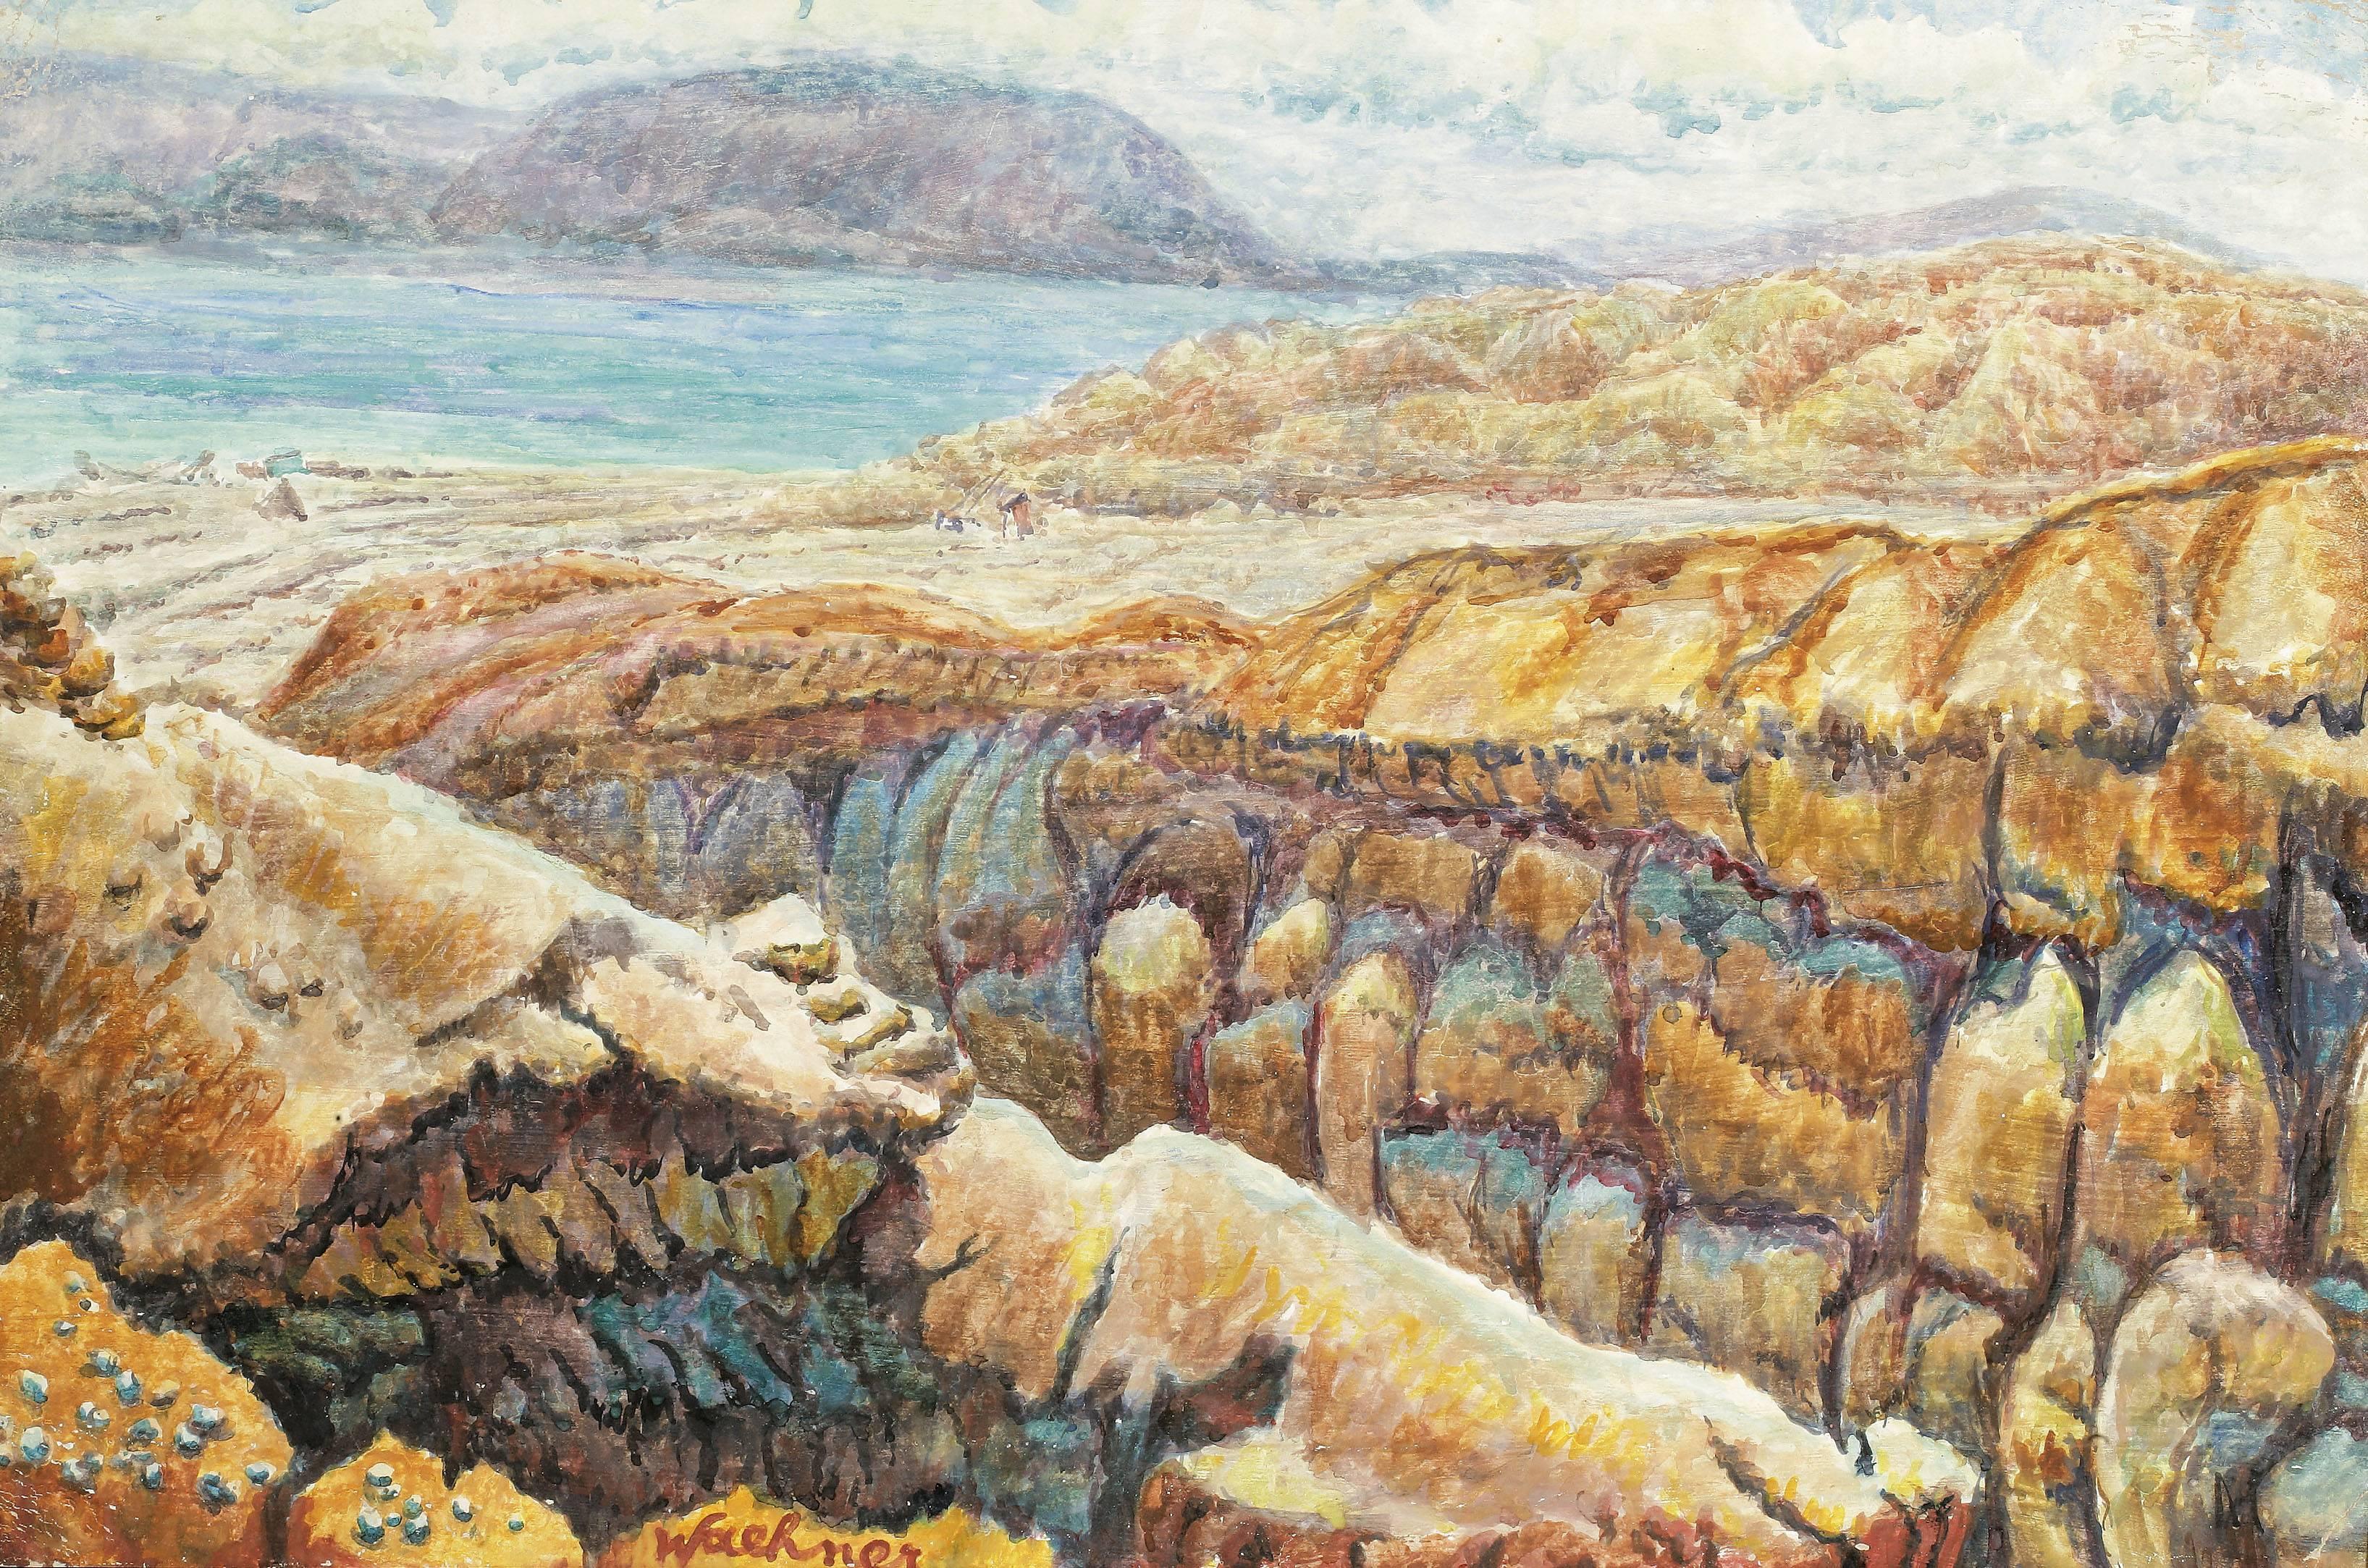 Canyon of the Dead Sea, 1960s - Modern Mixed Media Art by Trude Waehner